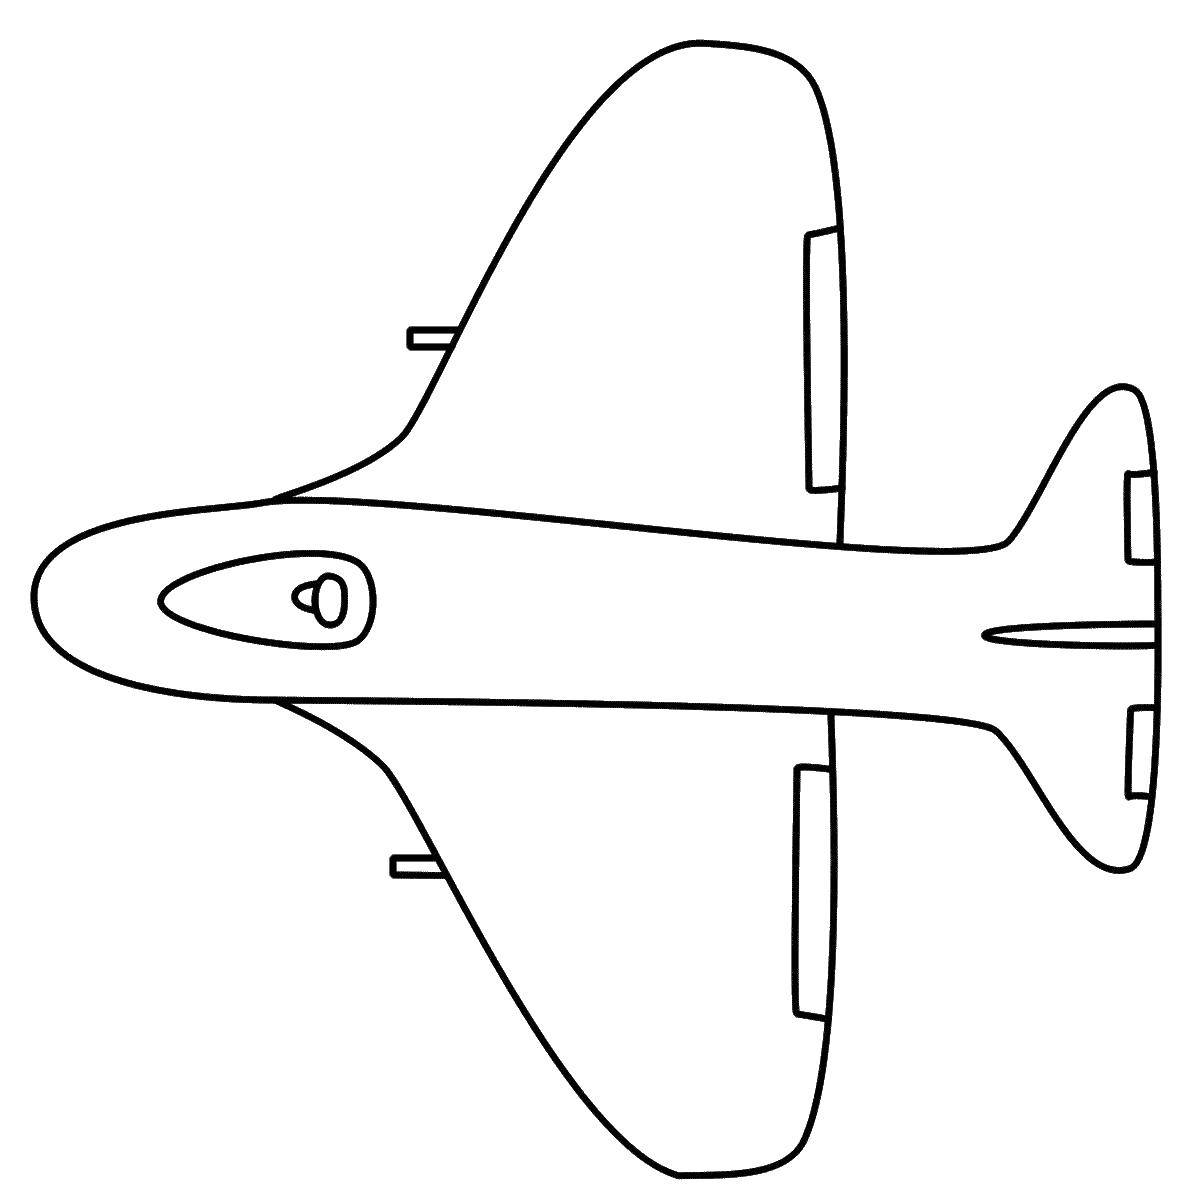 Coloring The plane on top. Category The planes. Tags:  aircraft, transportation, sky.